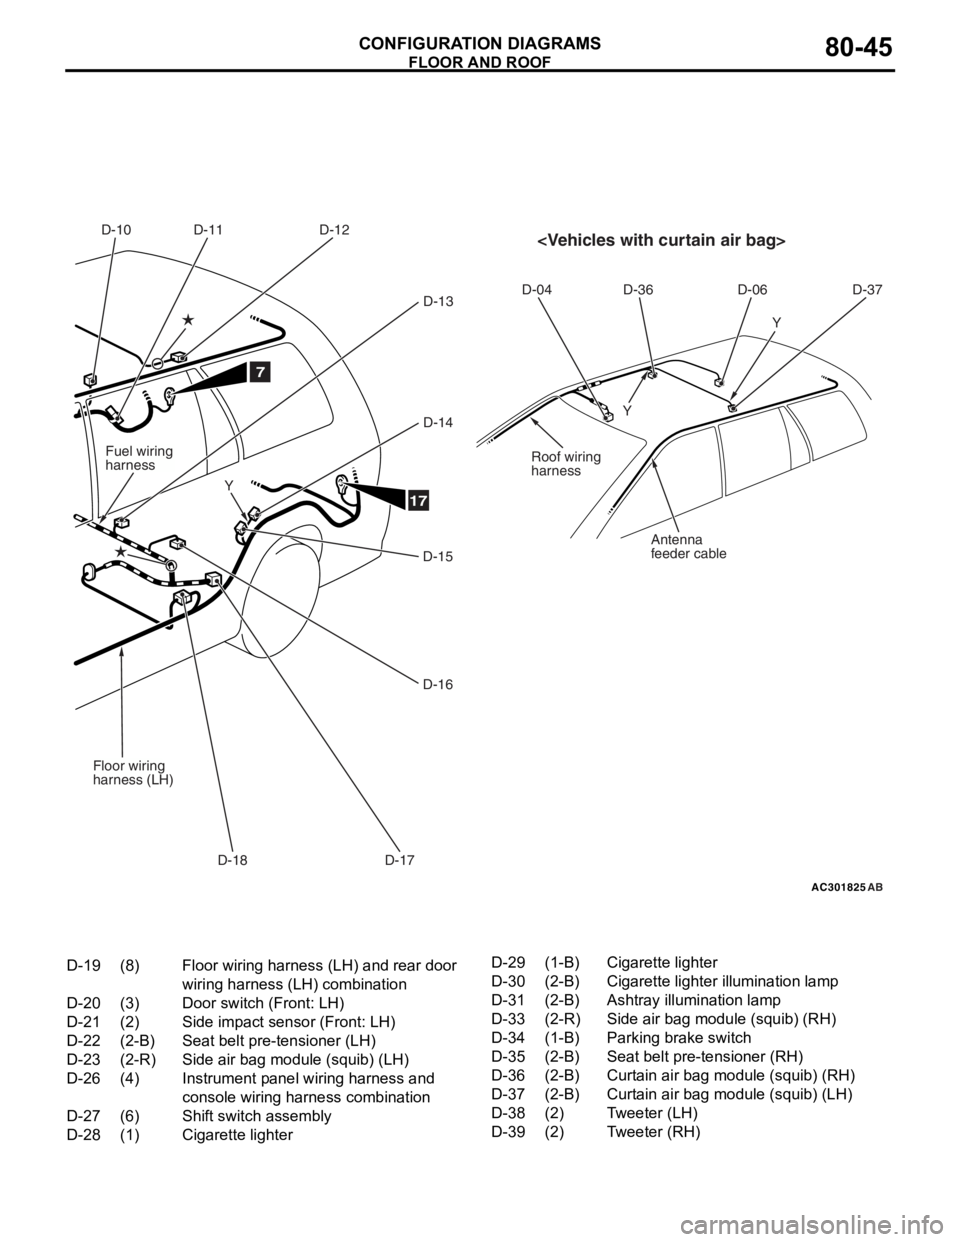 MITSUBISHI LANCER IX 2006  Service Manual 
AC301825
<Vehicles with curtain air bag>
AB
D-10D-12
D-14
D-15
D-16
D-17
D-18 Y
Y
D-04 D-36 D-06 D-37
Roof wiring
harnessFuel wiring
harness
7
17Y
D-11
D-13
Floor wiring
harness (LH)
Antenna
feeder c